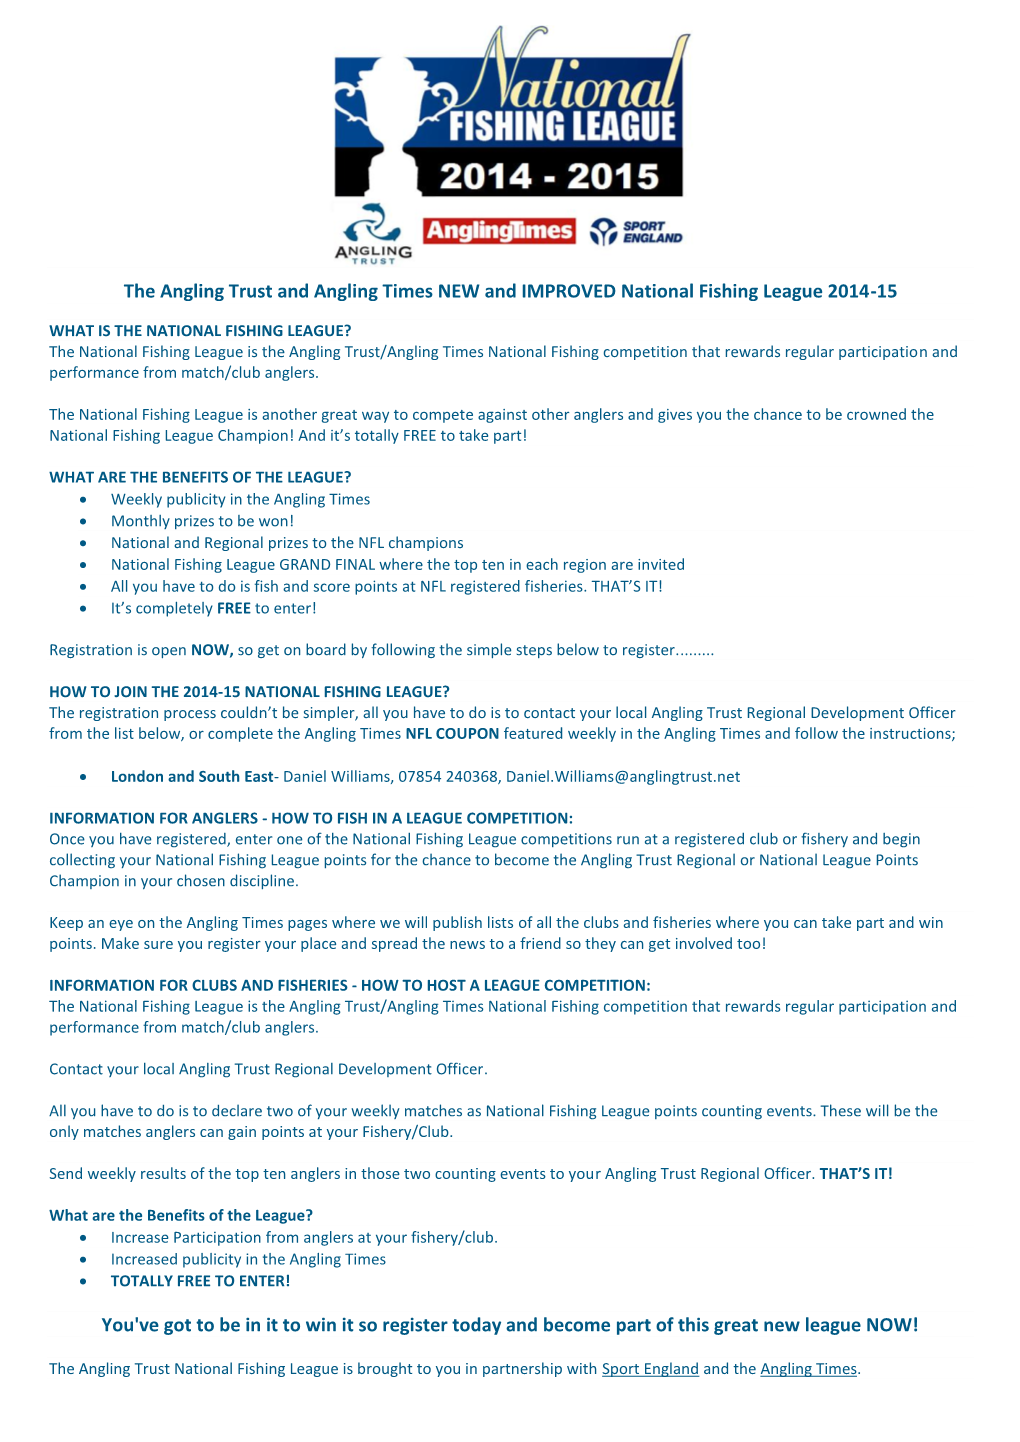 The Angling Trust and Angling Times NEW and IMPROVED National Fishing League 2014-15